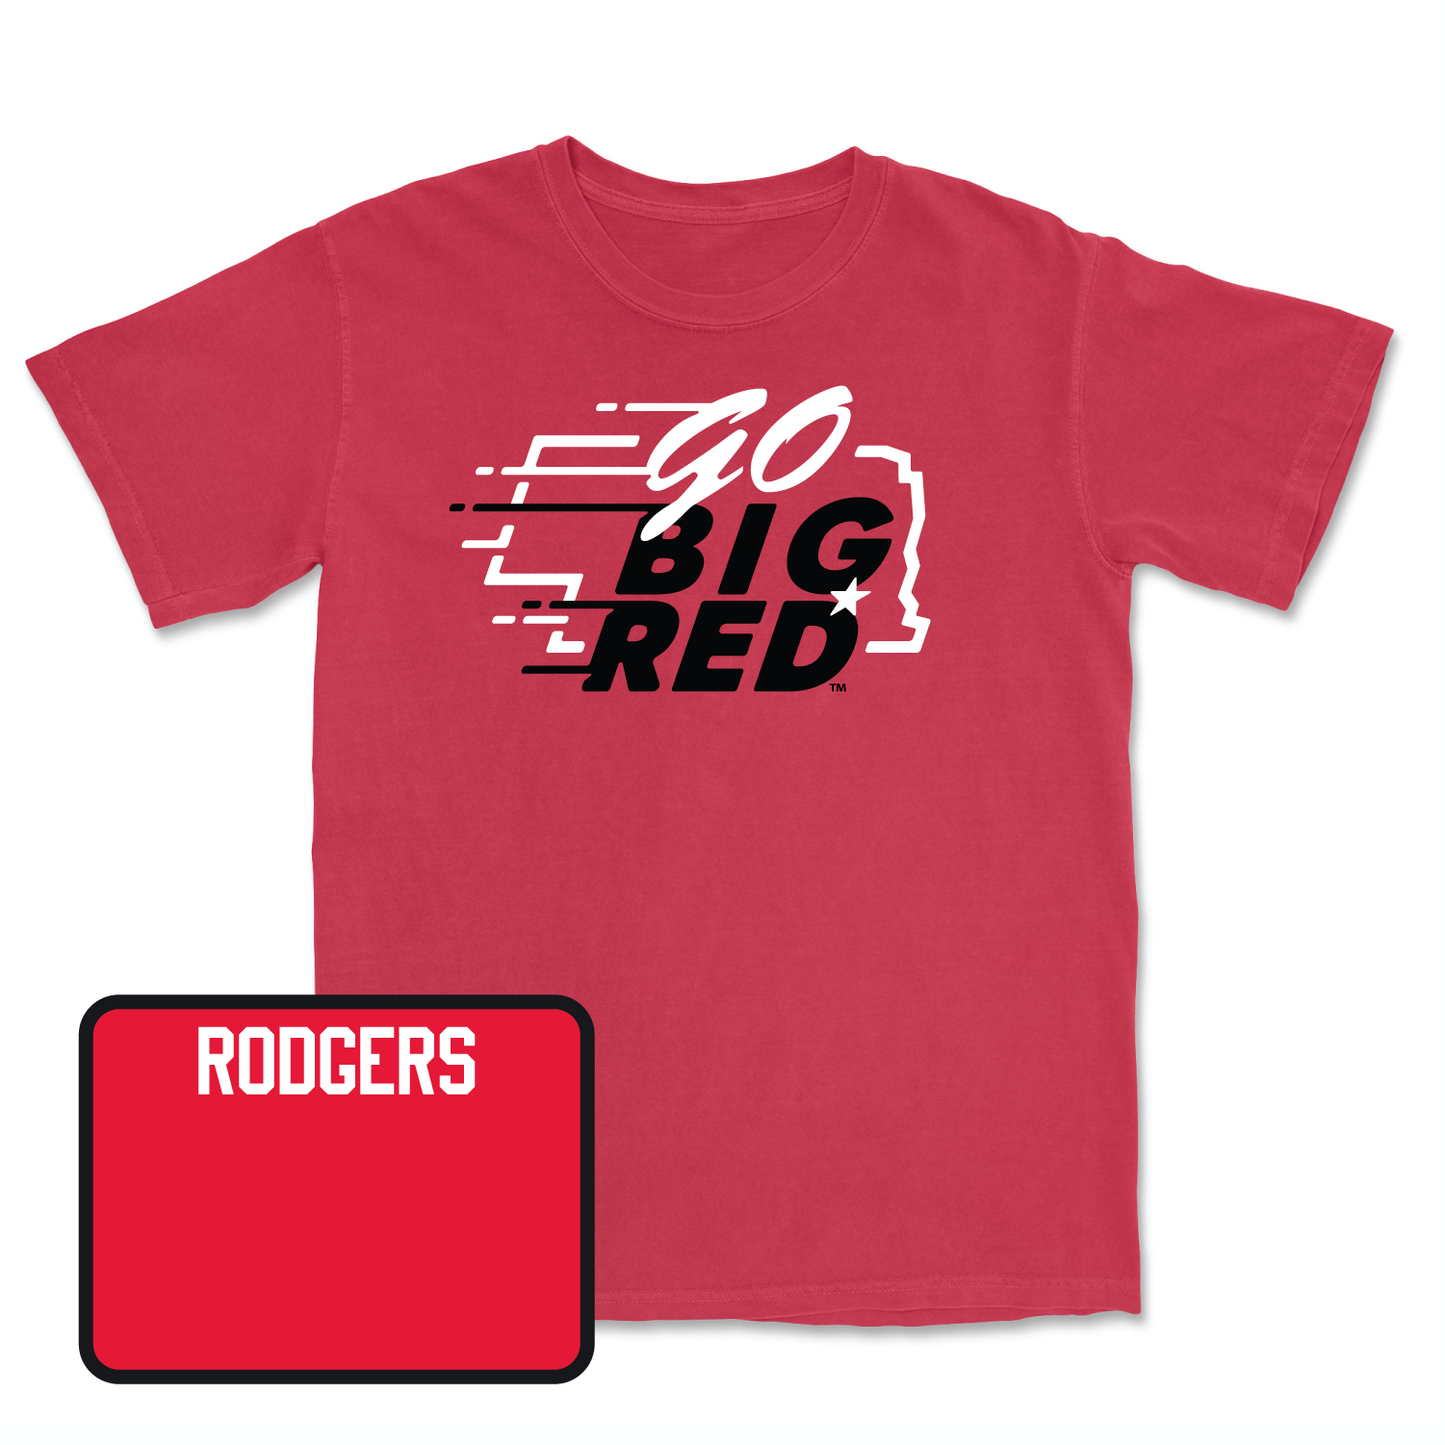 Red Track & Field GBR Tee Large / Omar Rodgers